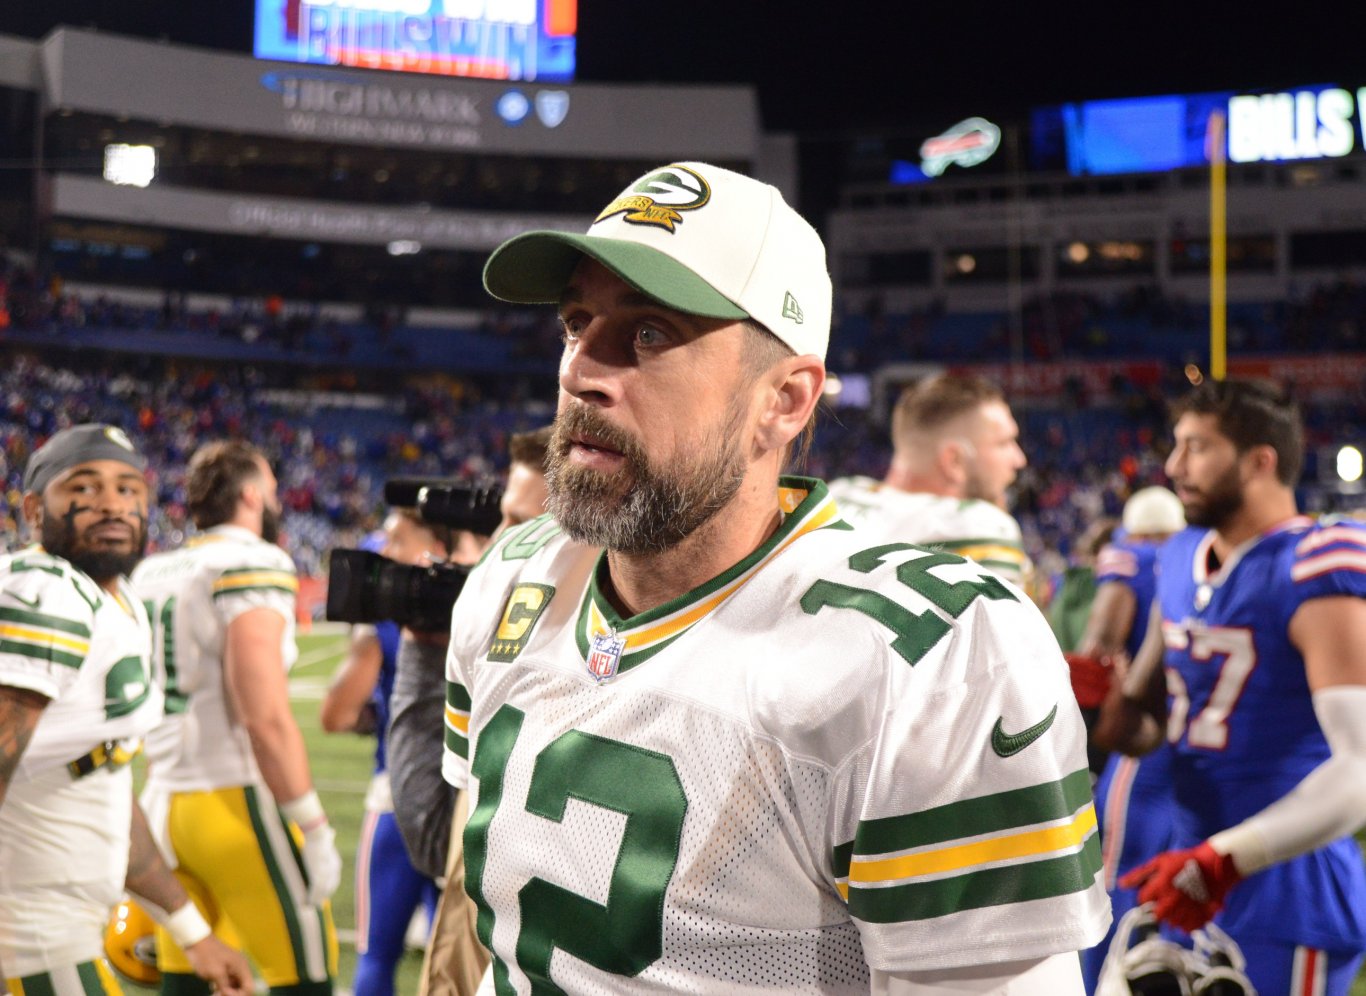 Packers QB Aaron Rodgers' Final Words at Final Press Conference